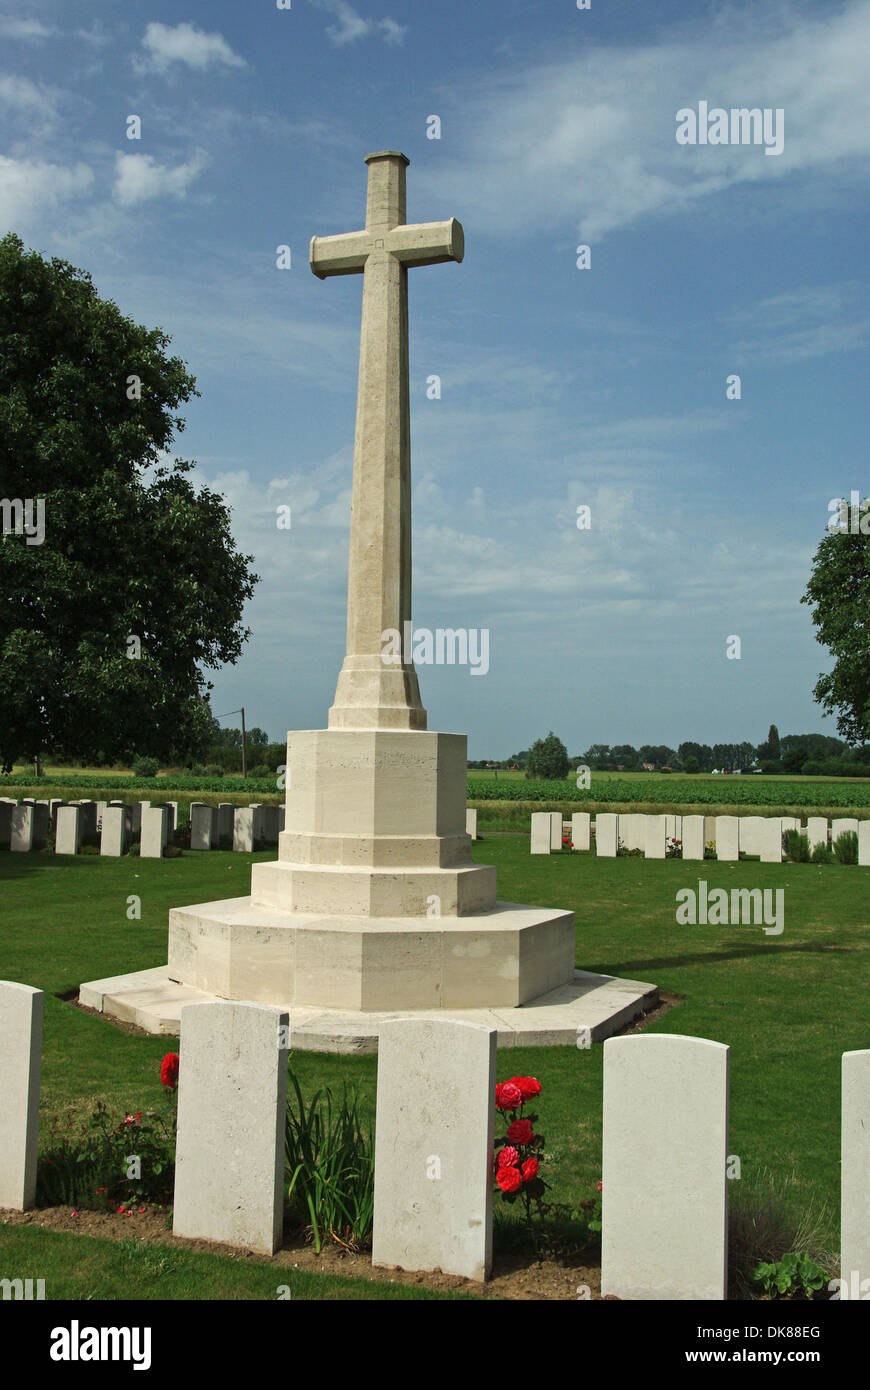 Cross of Sacrifice and headstones at the WW1 cemetery of Laventie, France Stock Photo